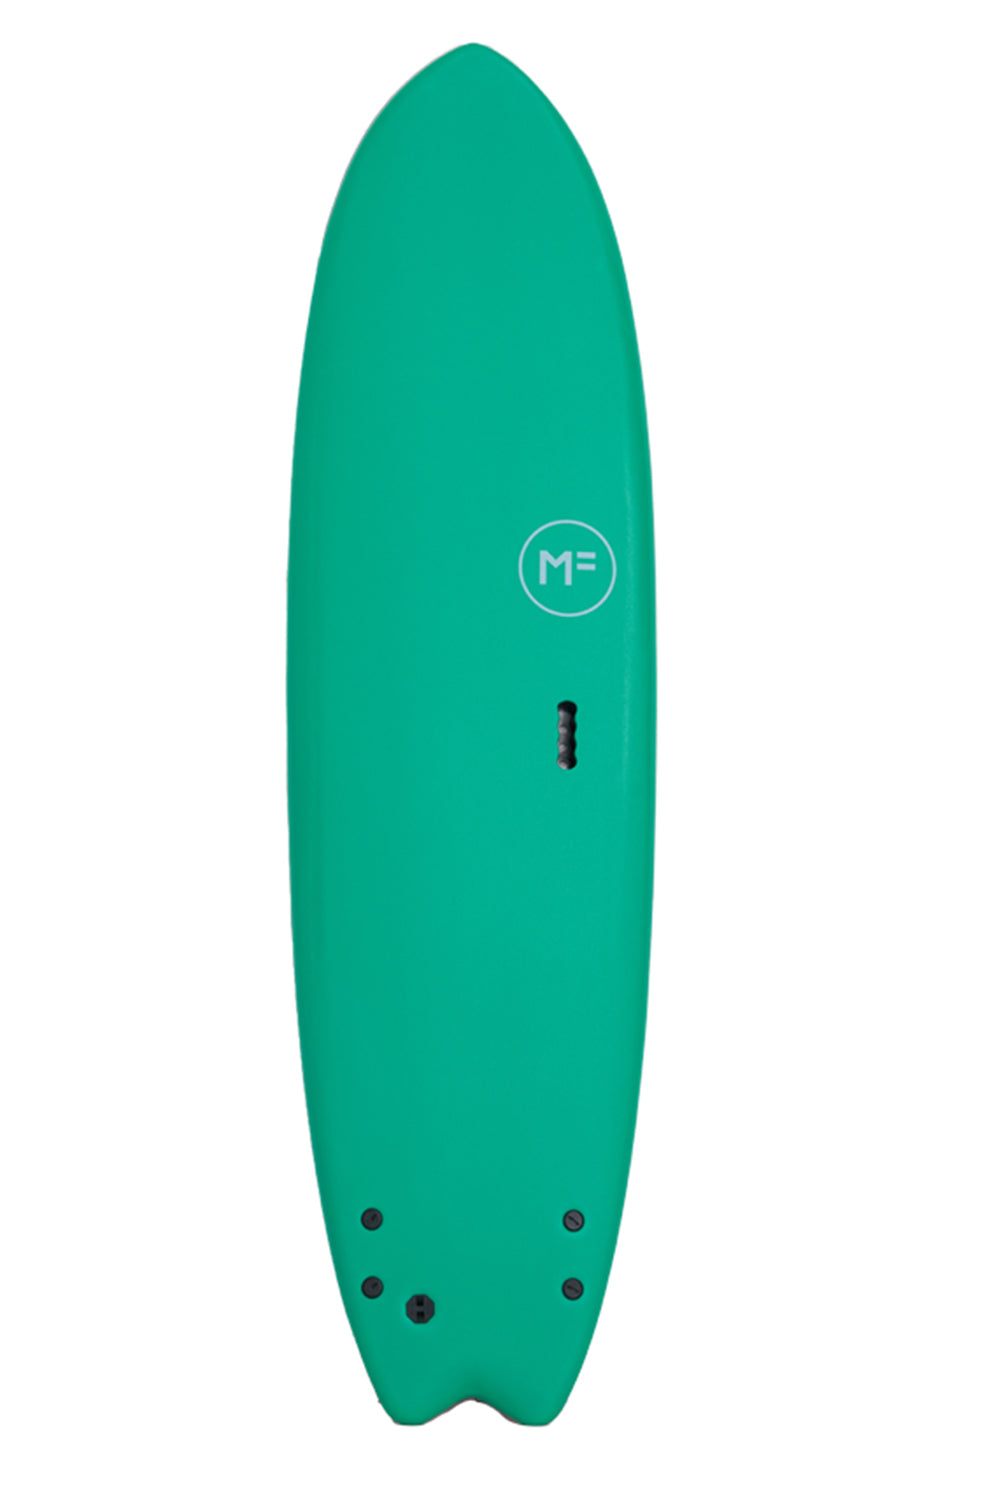 Mick Fanning MF Super Soft Twin Town Softboard - Comes with fins